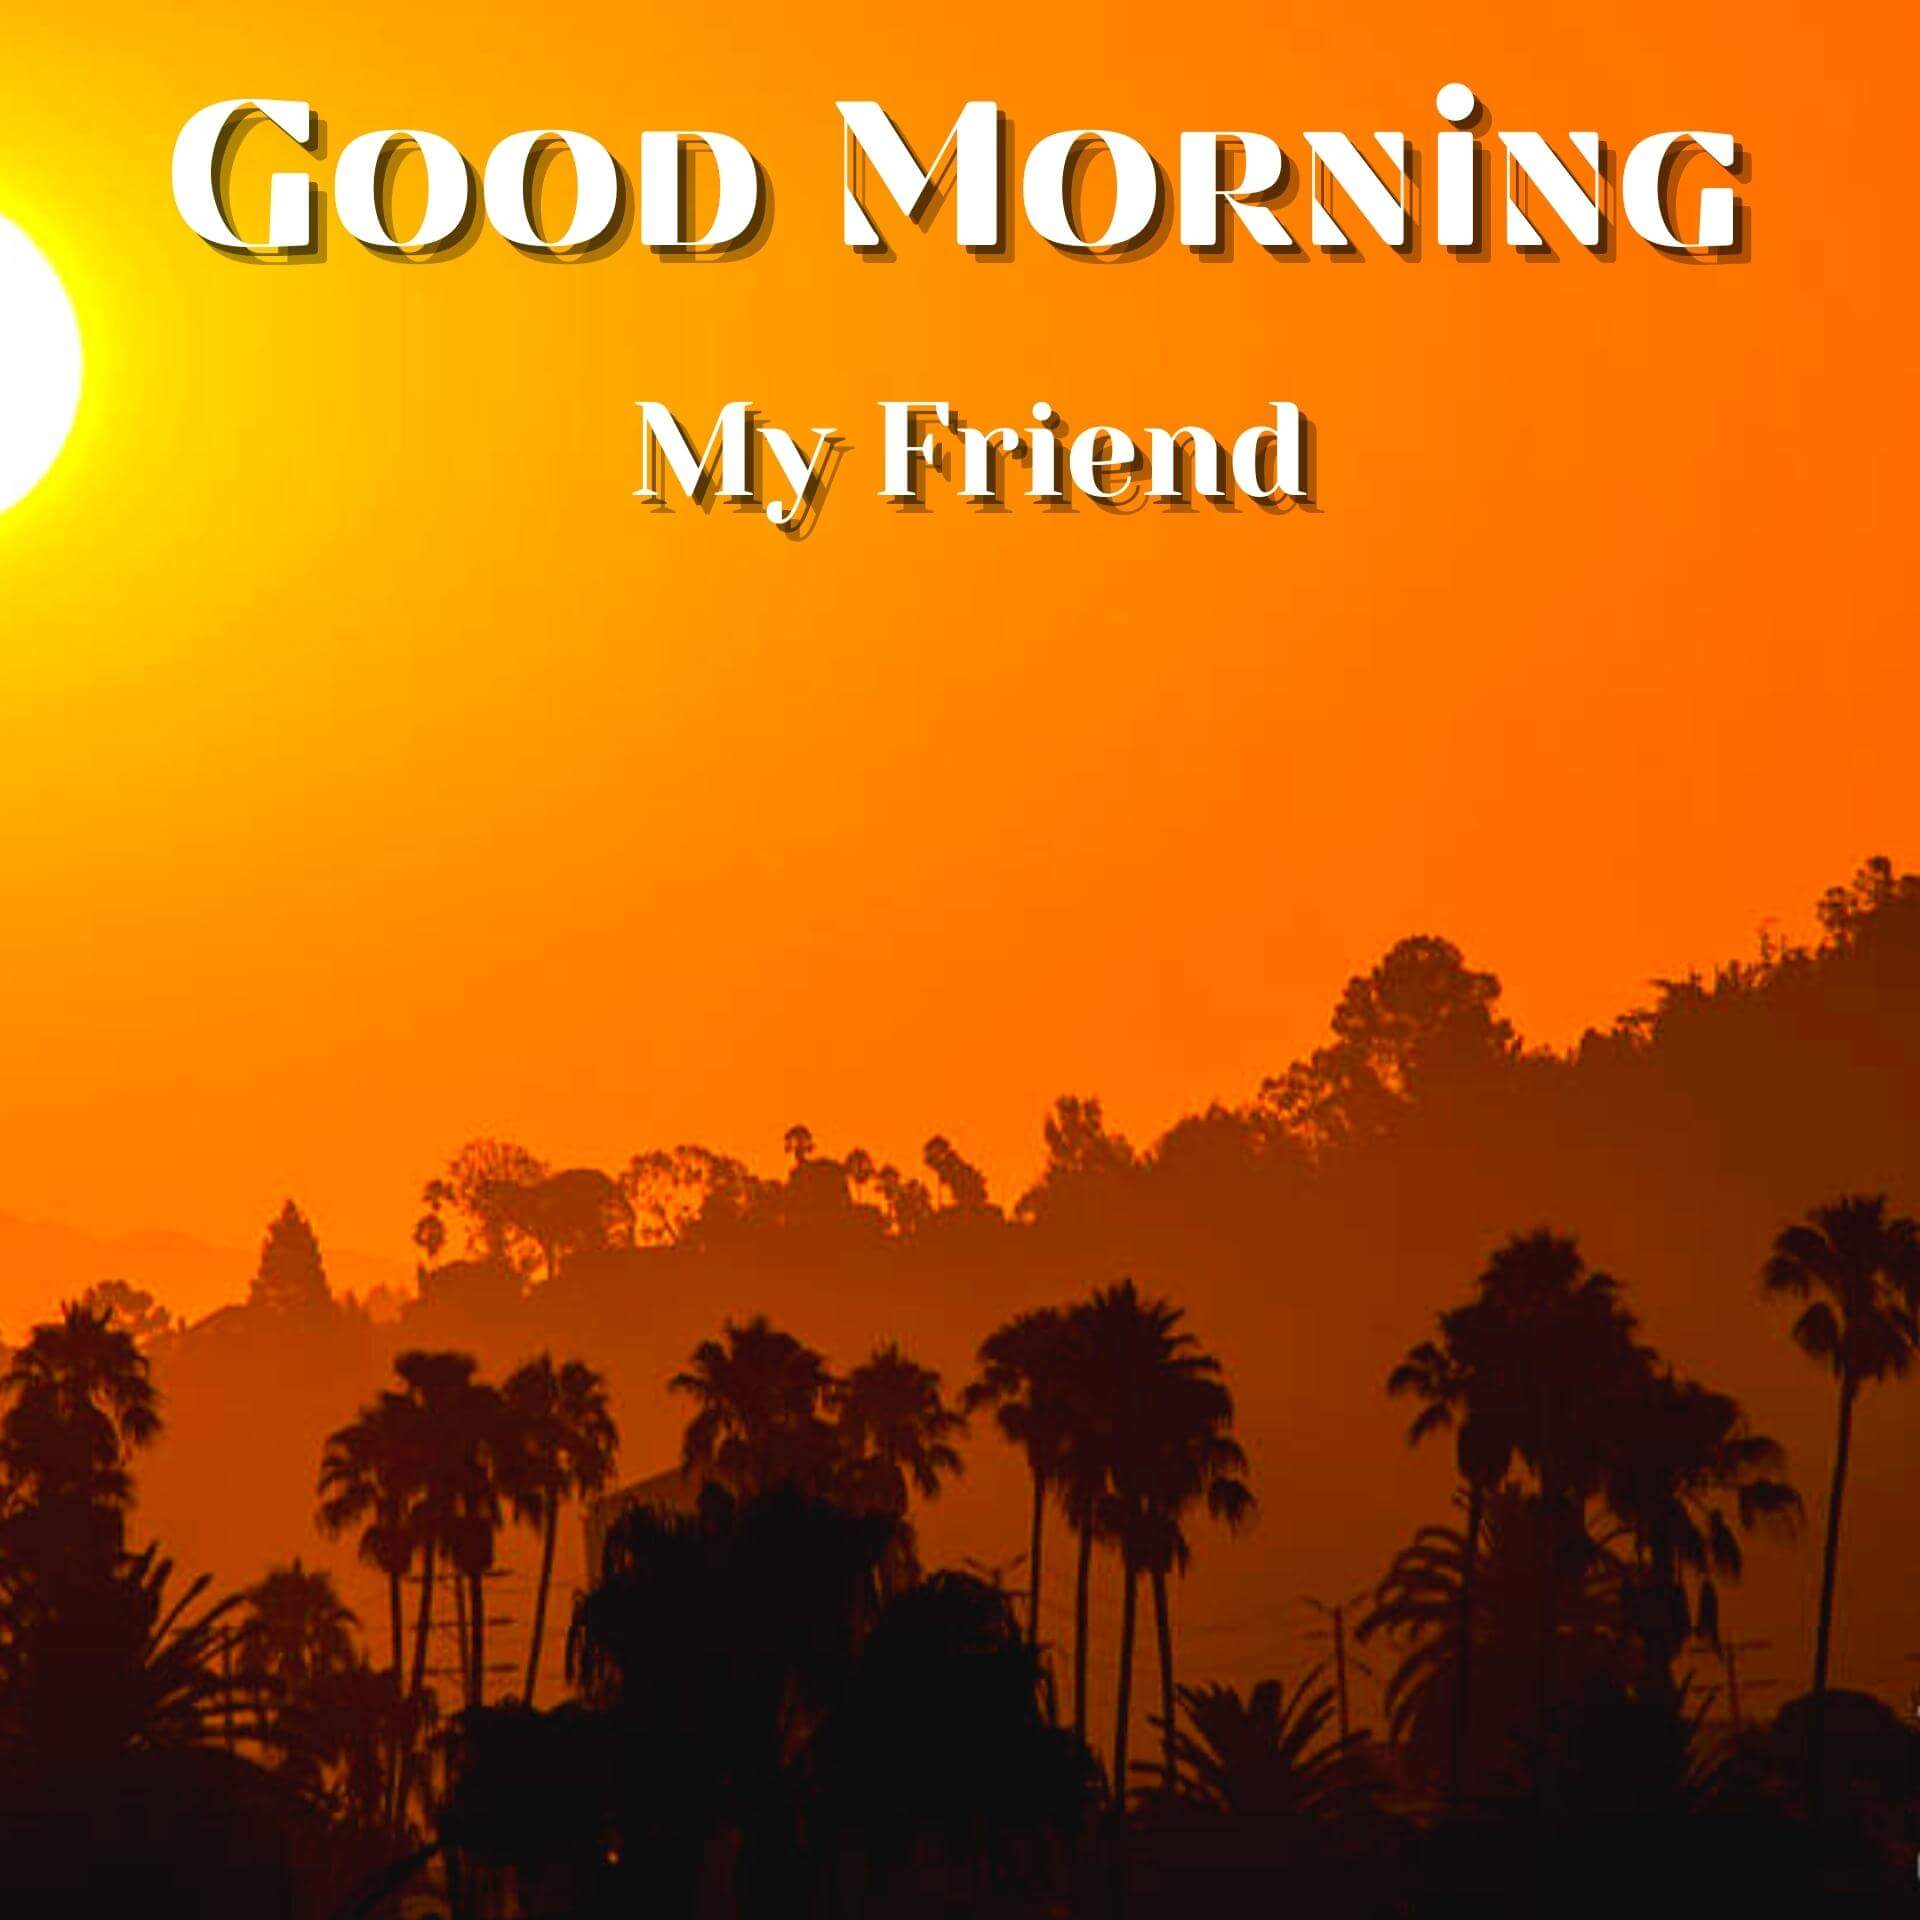 good morning wishes free download